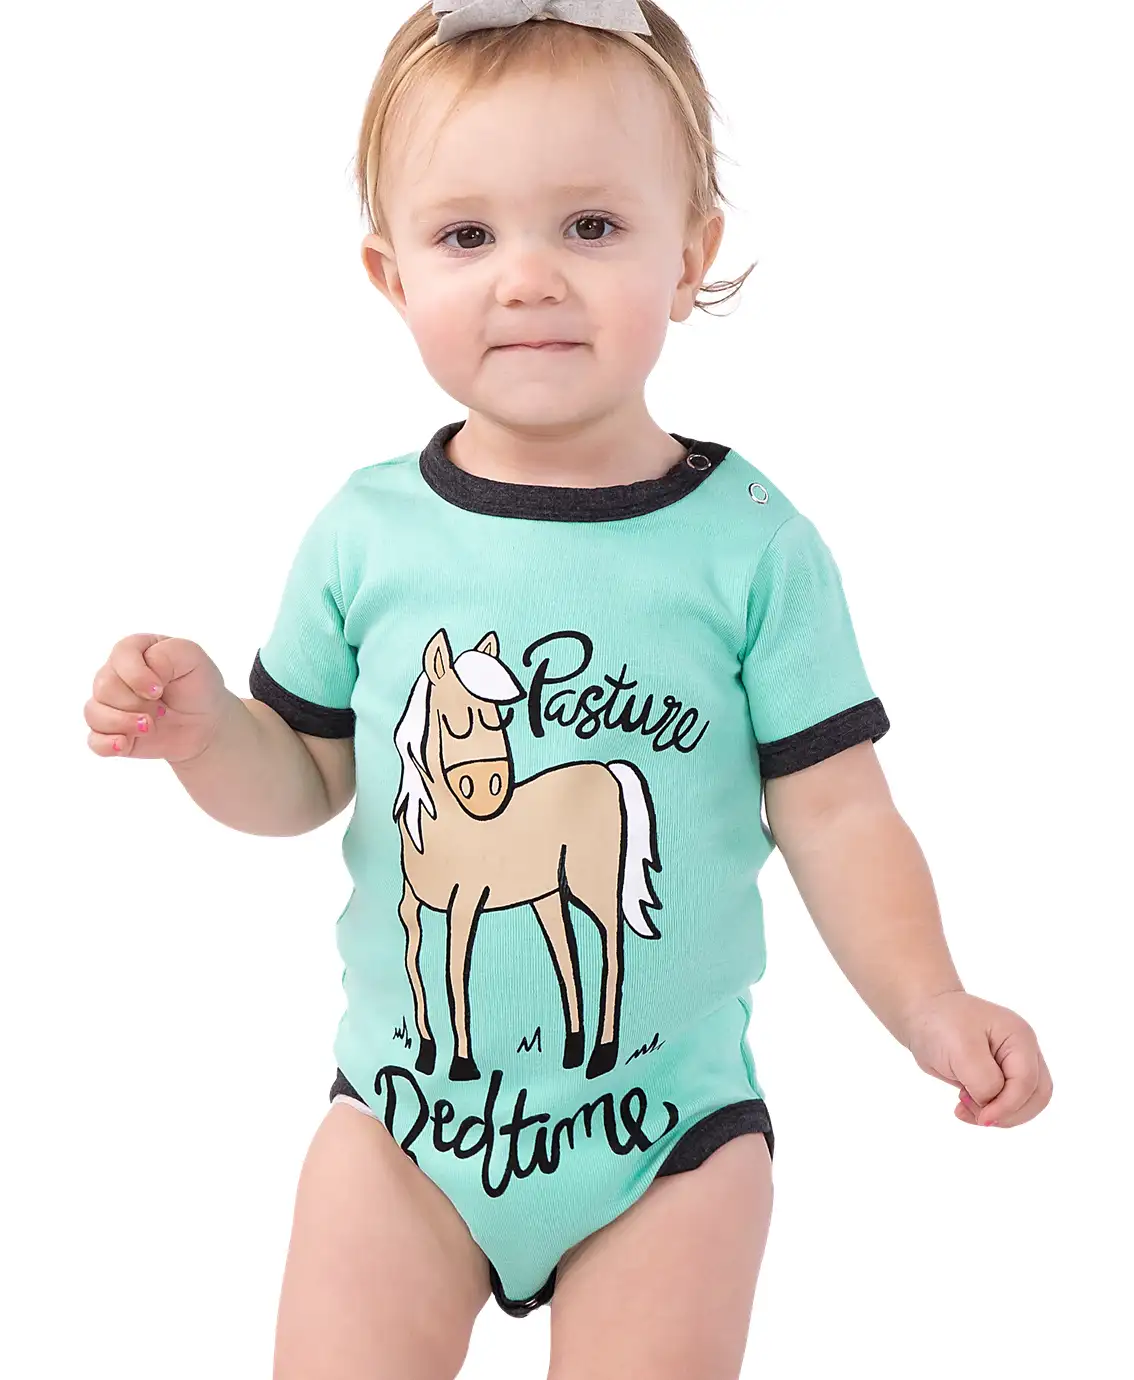 Pasture Bedtime Turquoise Horse Onesie by Lazy One